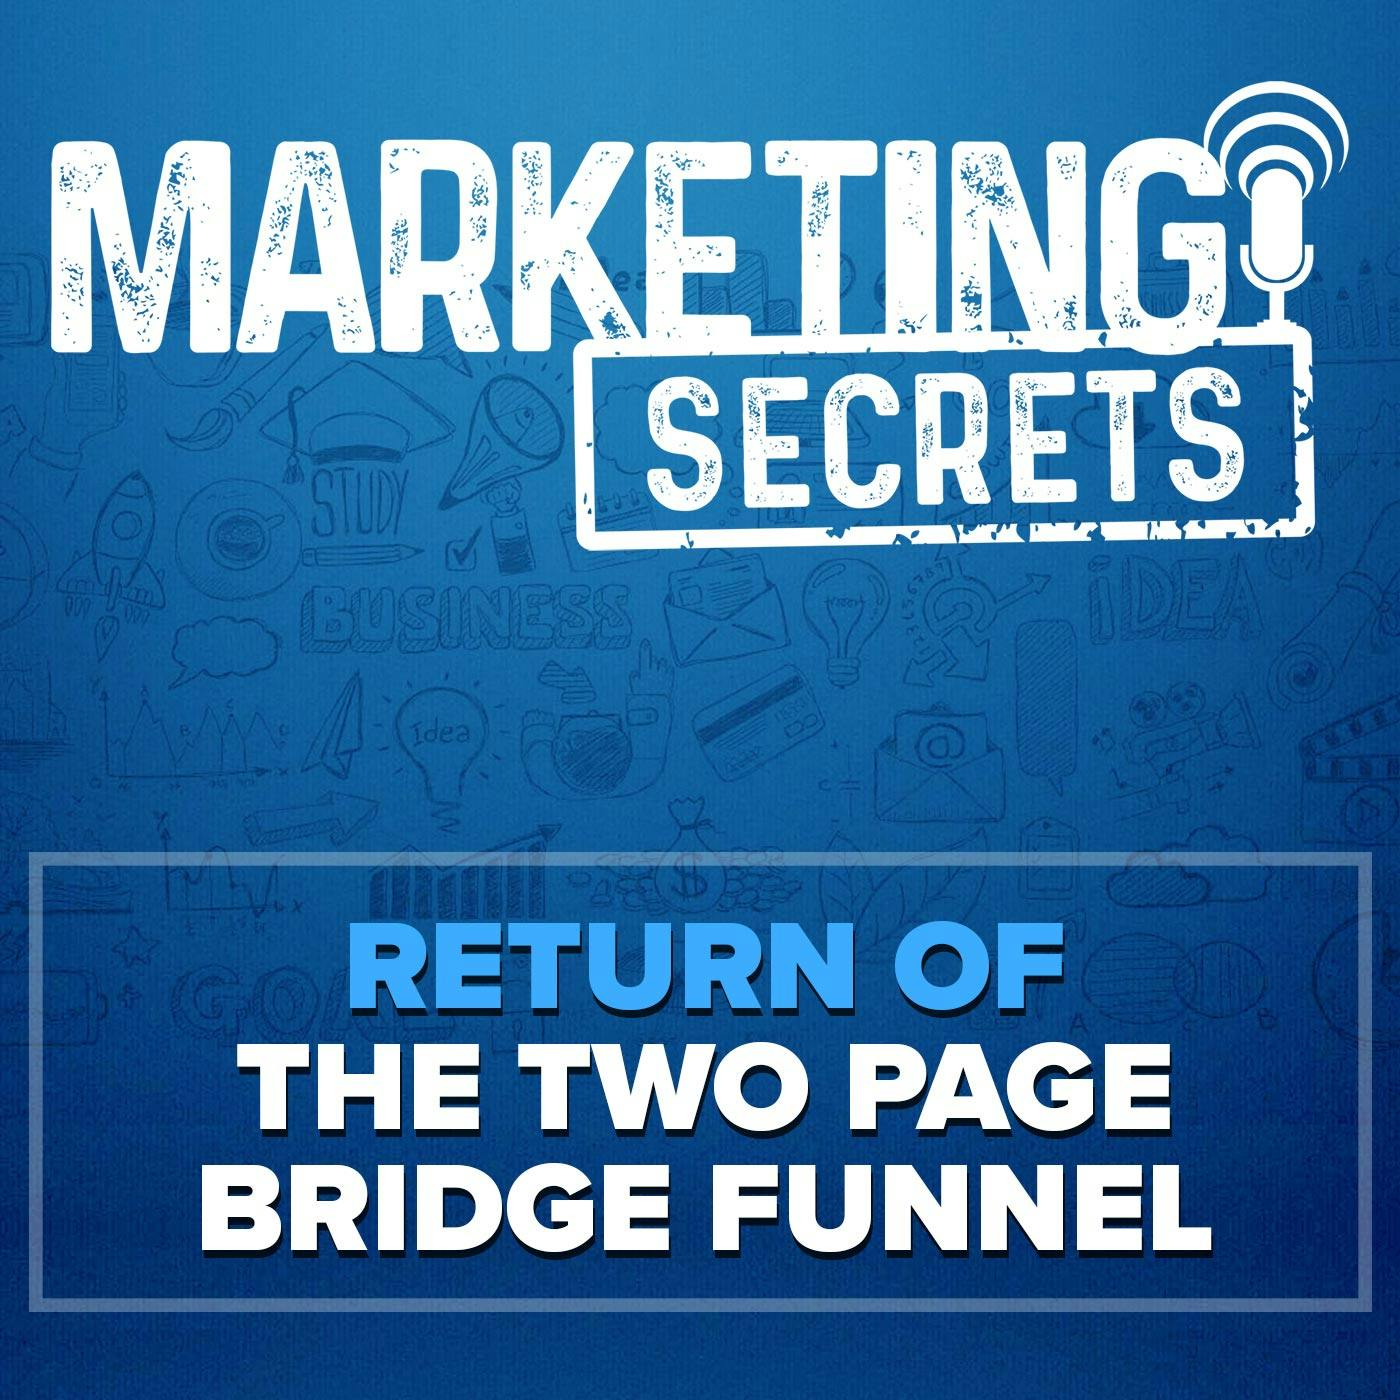 Return of the Two Page Bridge Funnel